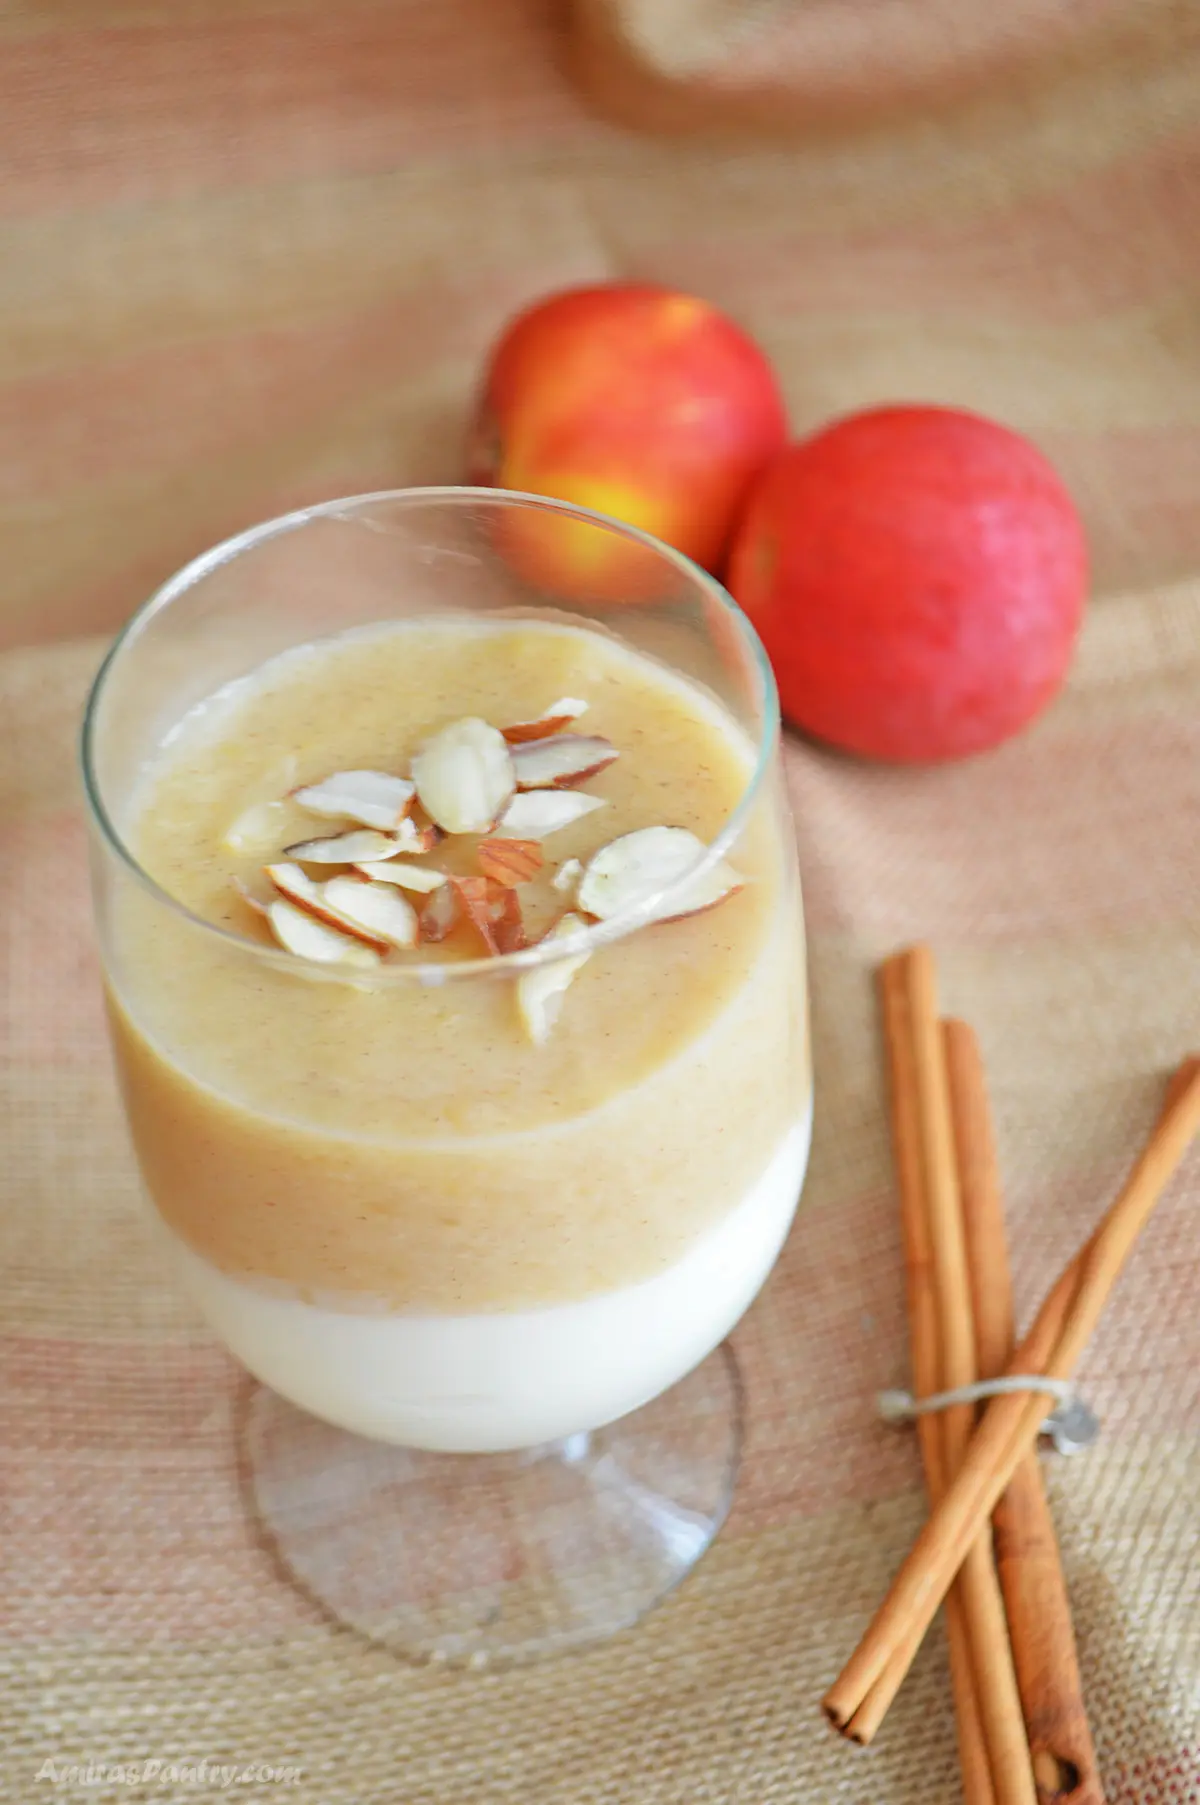 A cup with apple and milk pudding.